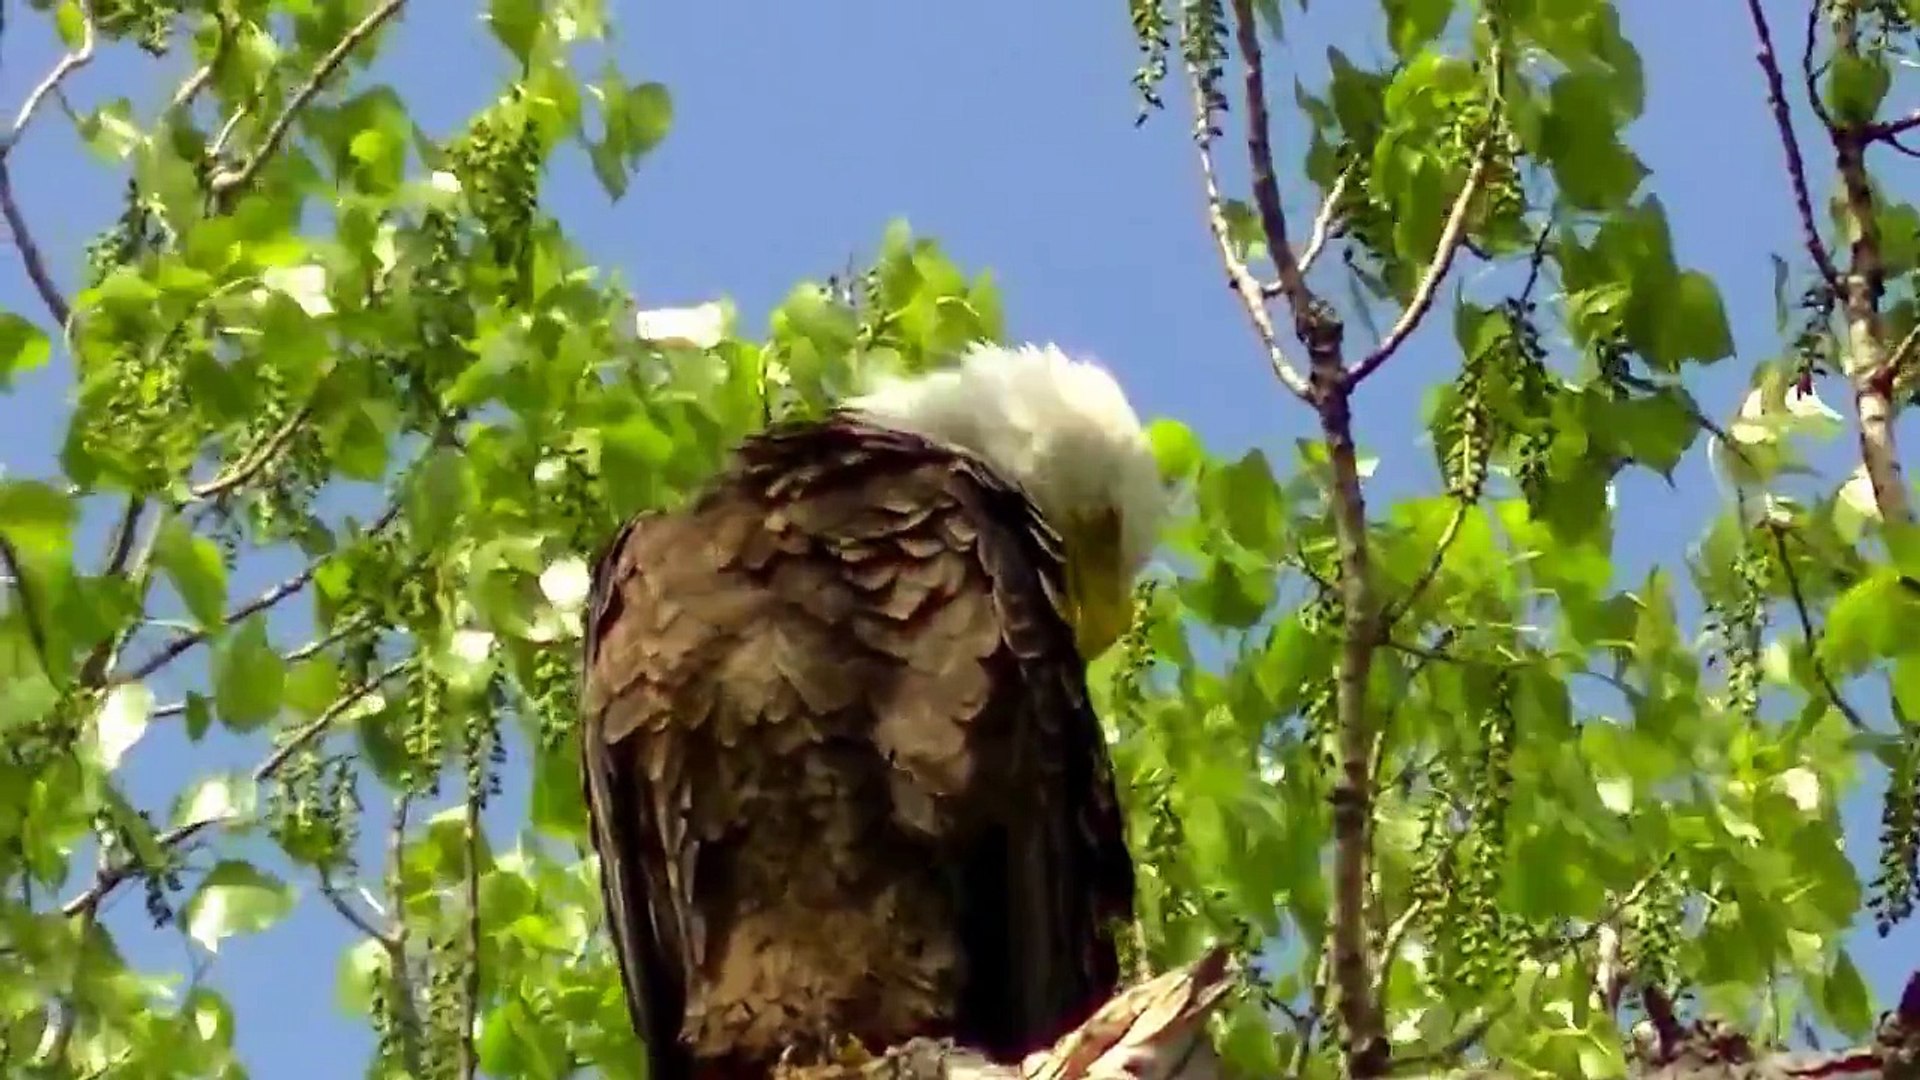 This Beautiful Bald Eagle Nesting Feeding Young Eaglets !